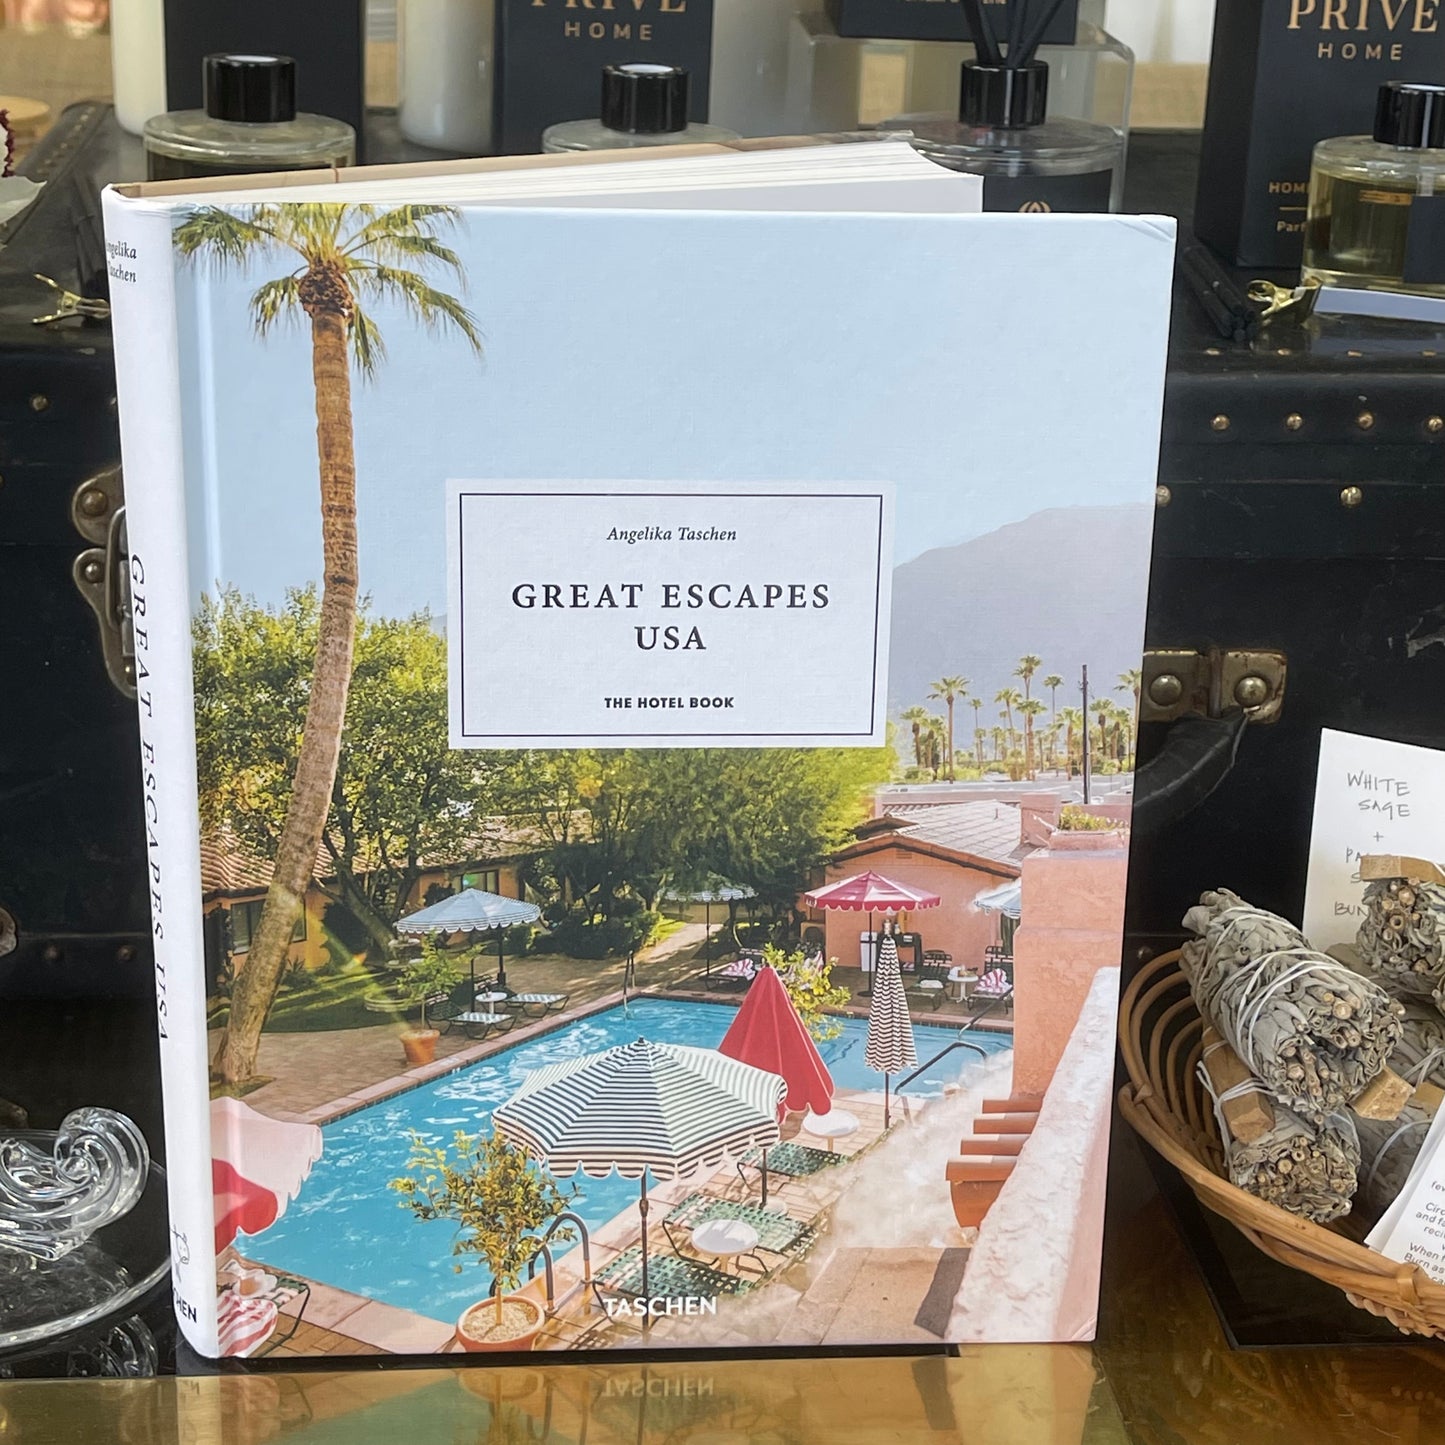 Great Escapes USA: The Hotel Book by Angelika Taschen